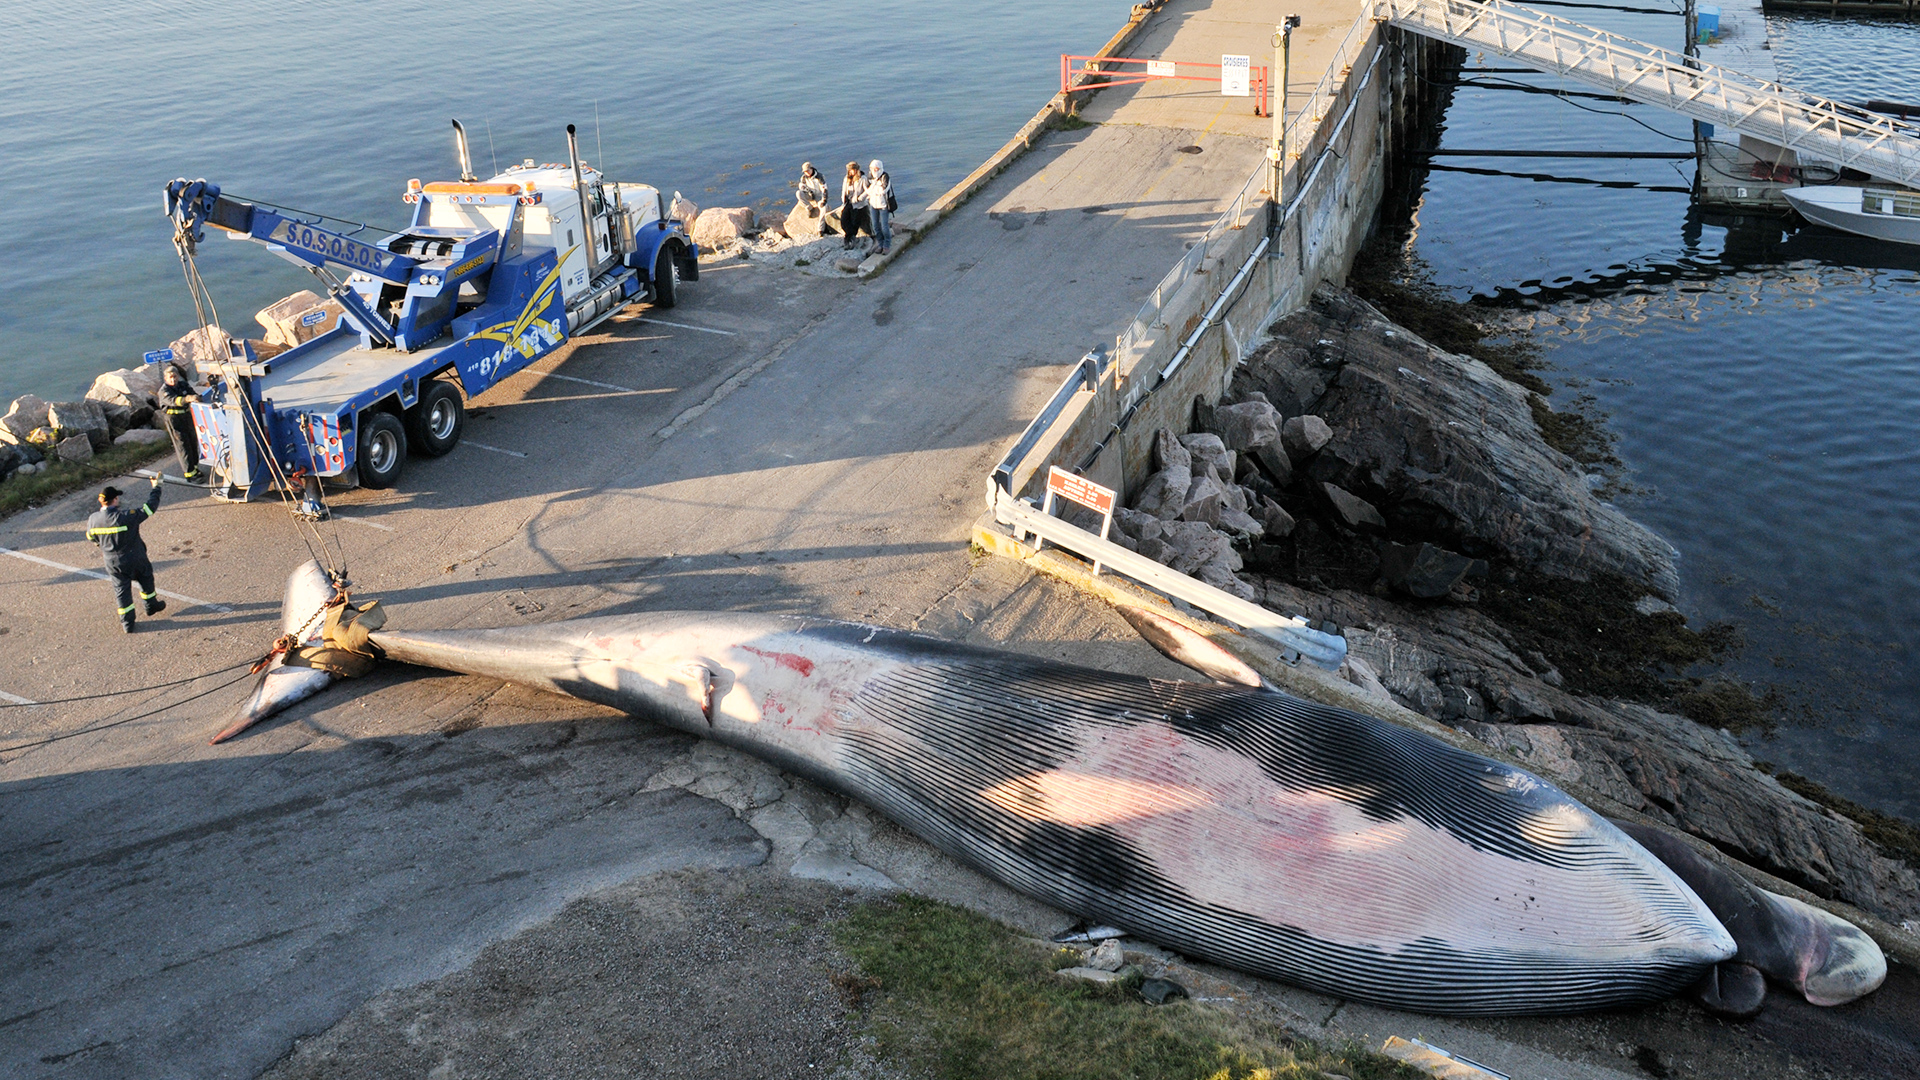 A fin whale carcass is lifted out of the water at the docks in Les Bergeronnes. The animal’s tail is attached to a crane.